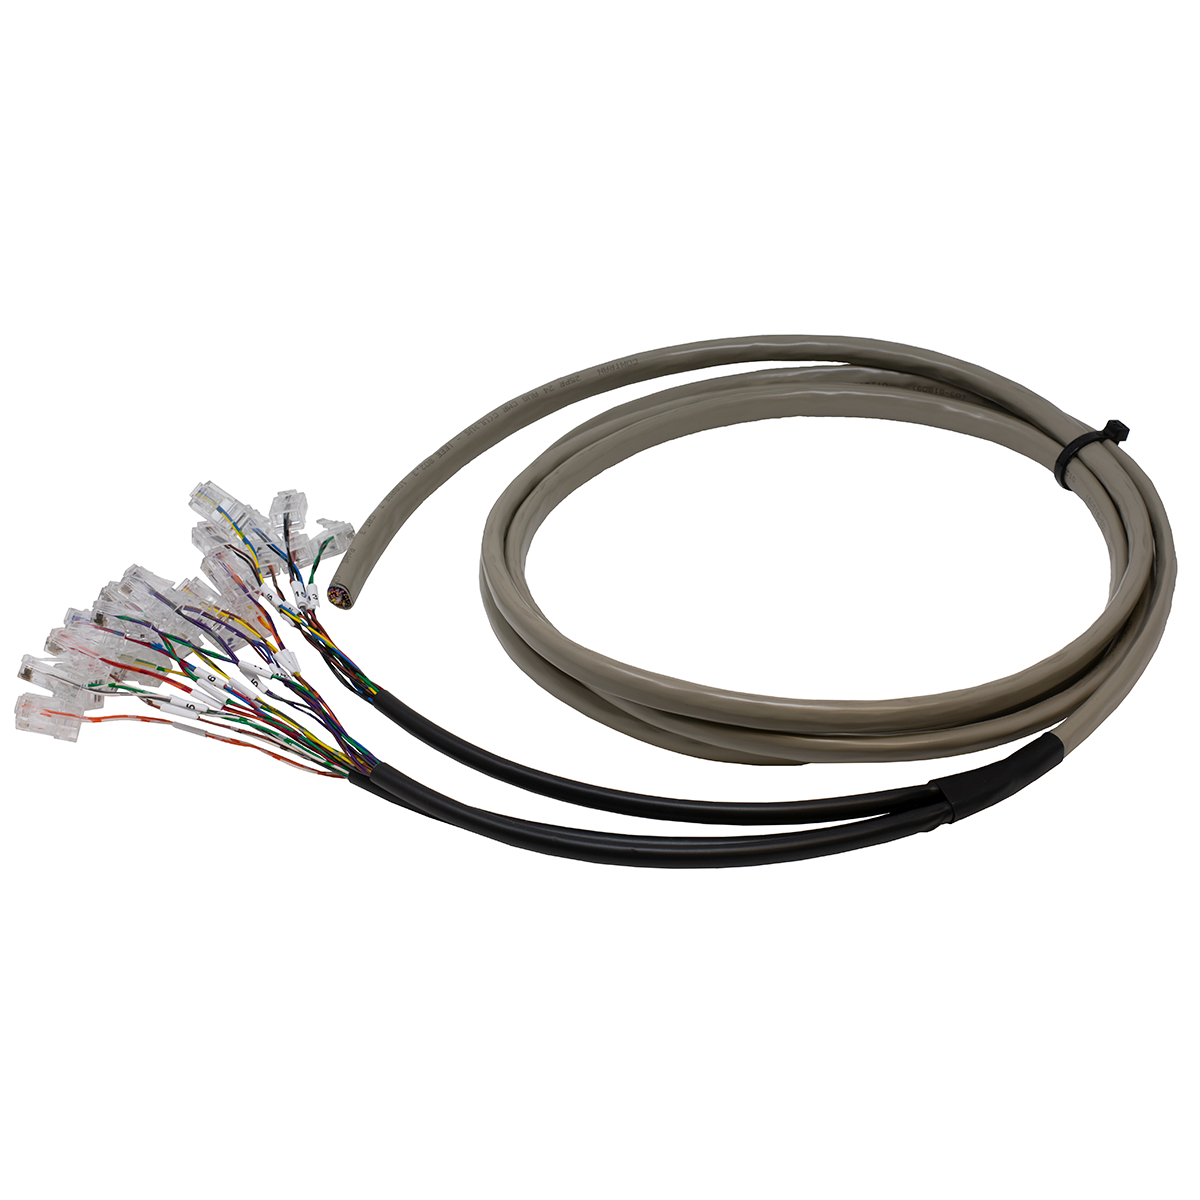 QWIK 15' Avaya IP Office / Samsung Officeserv Cable